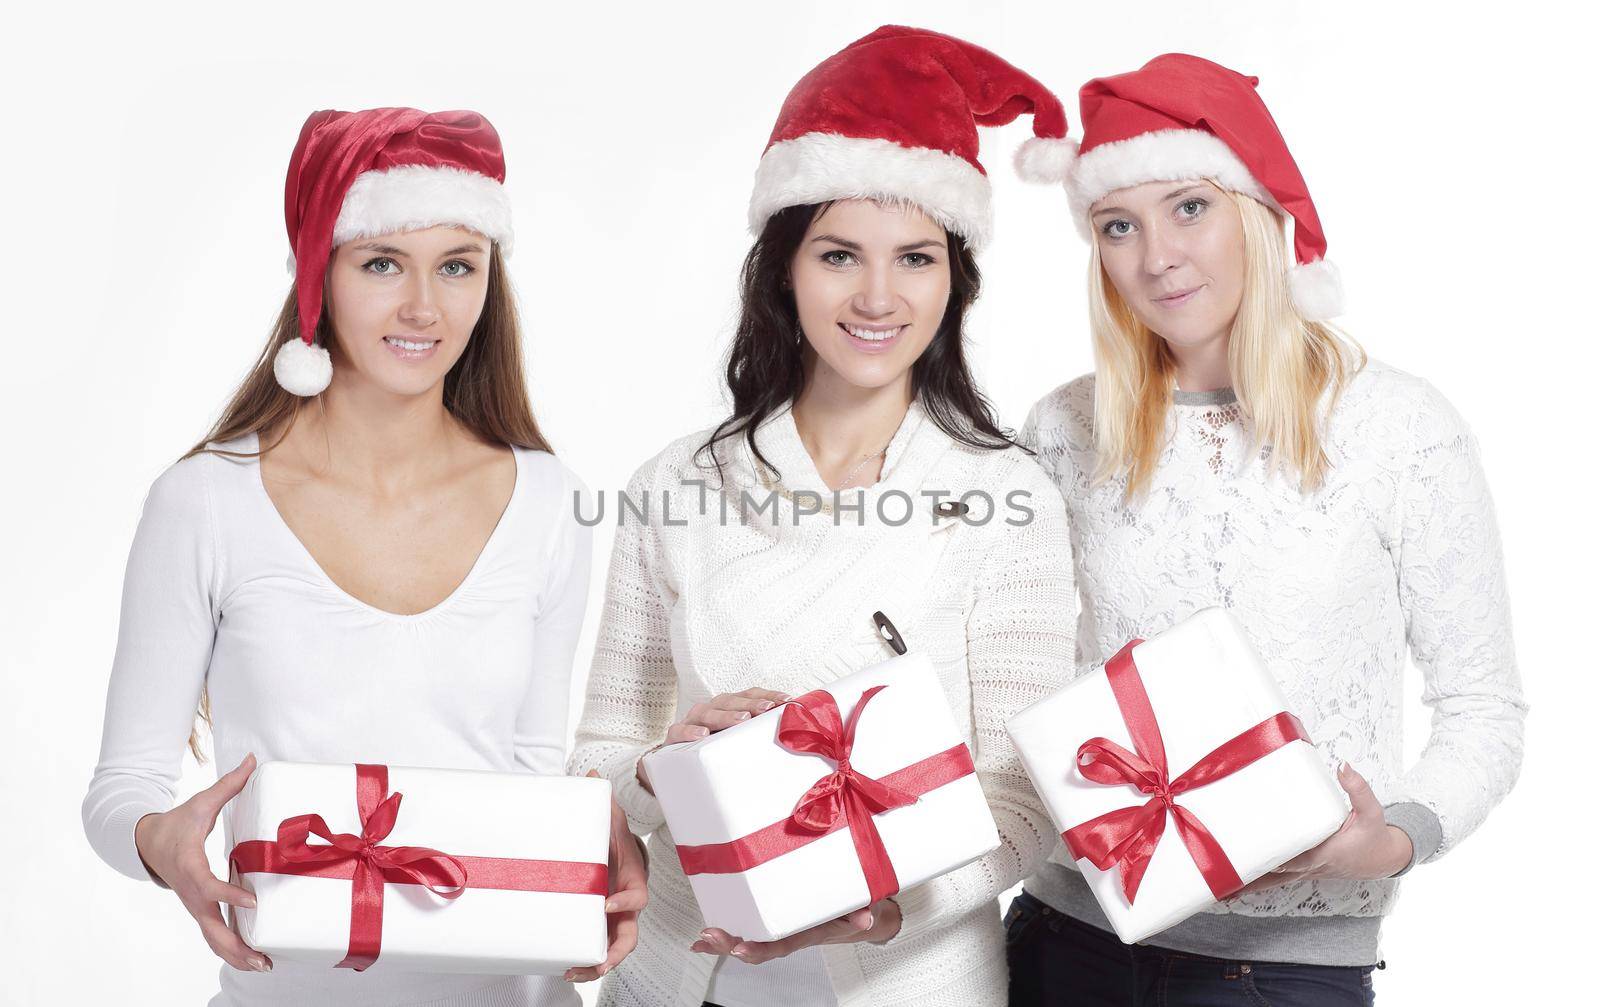 group of female students in costume of Santa Claus with Christmas gifts .photo with copy space.